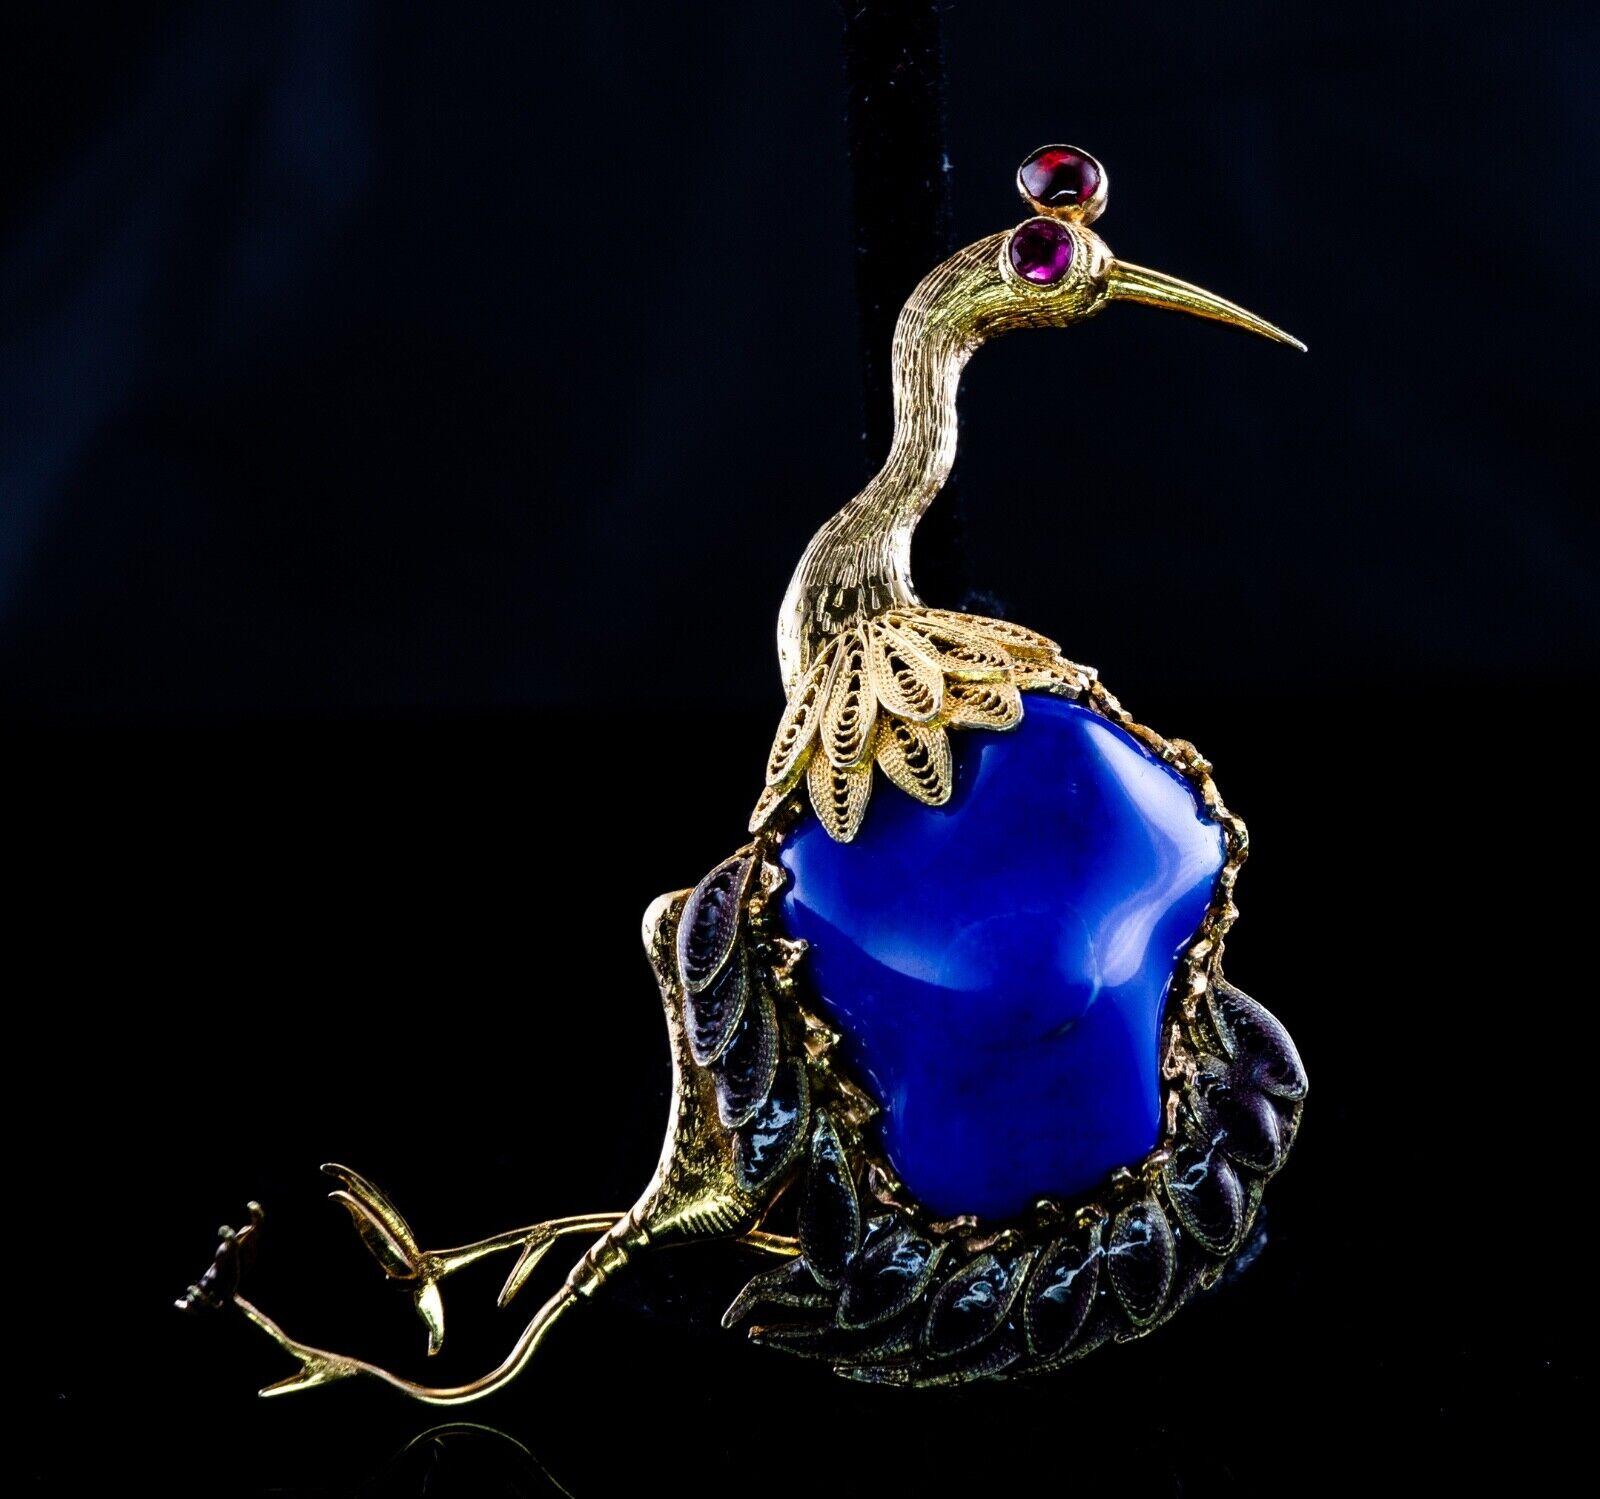 Lapis Lazuli Ruby Brooch Peacock Bird 14K Gold Vintage

This exceptional whimsical Lapis Lazuli bird brooch is crafted in solid 14k Yellow Gold. The center free form genuine Lapis Lazuli measures approximately 3/4